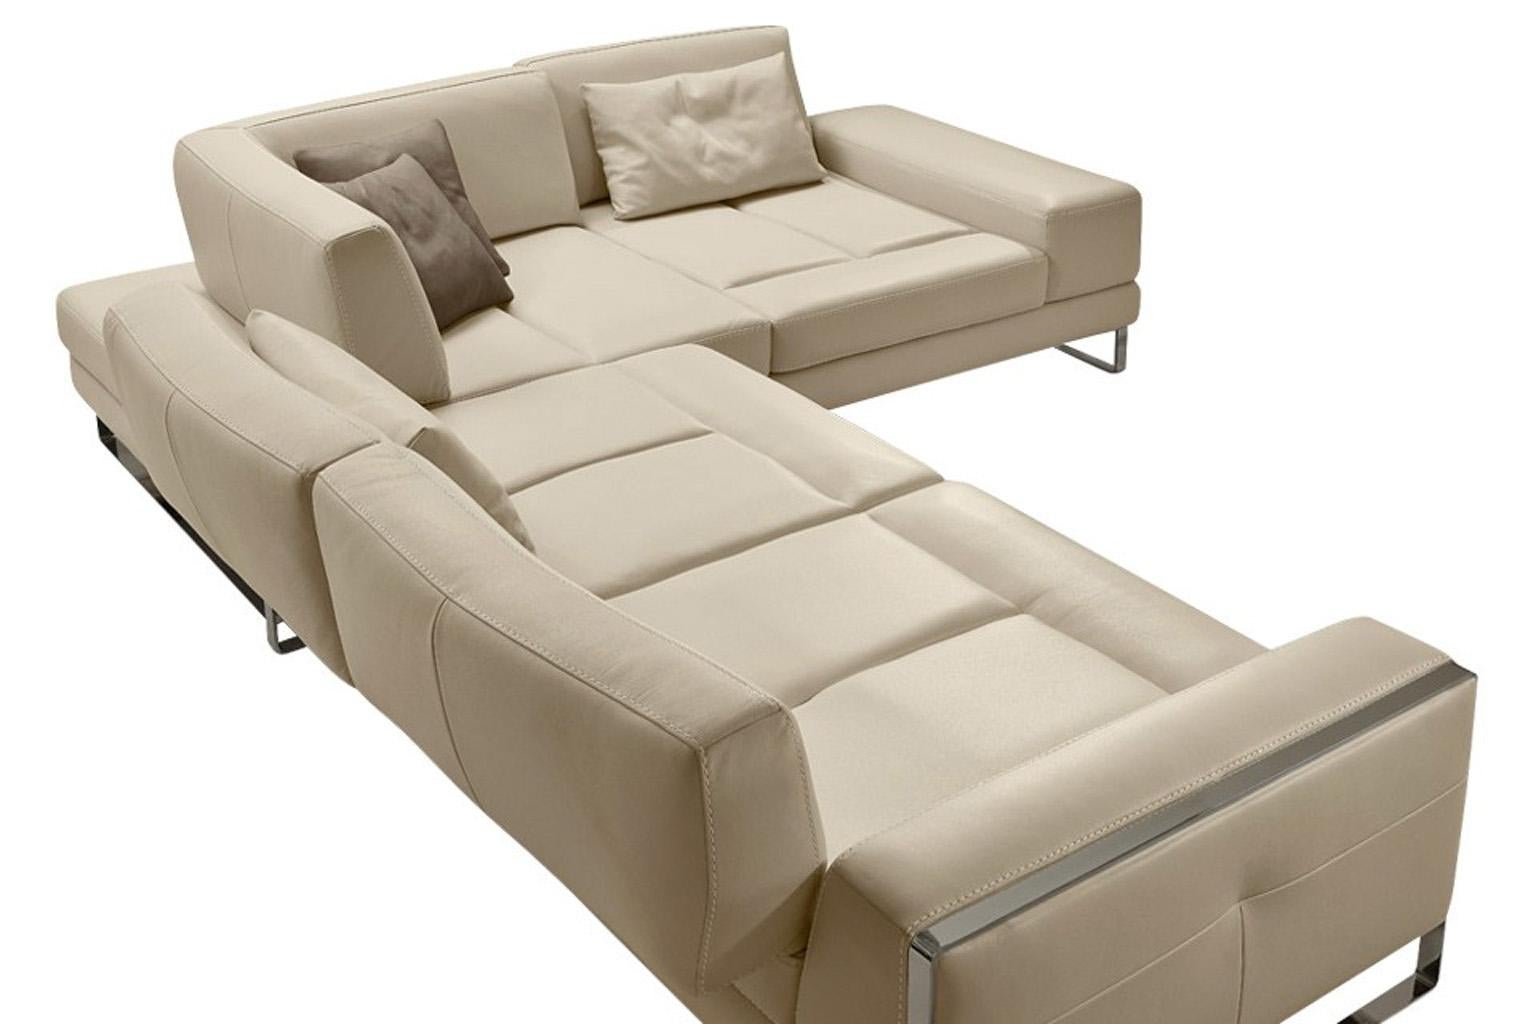 European Italian Leather Sectional with Adjustable Back Cushions For Sale